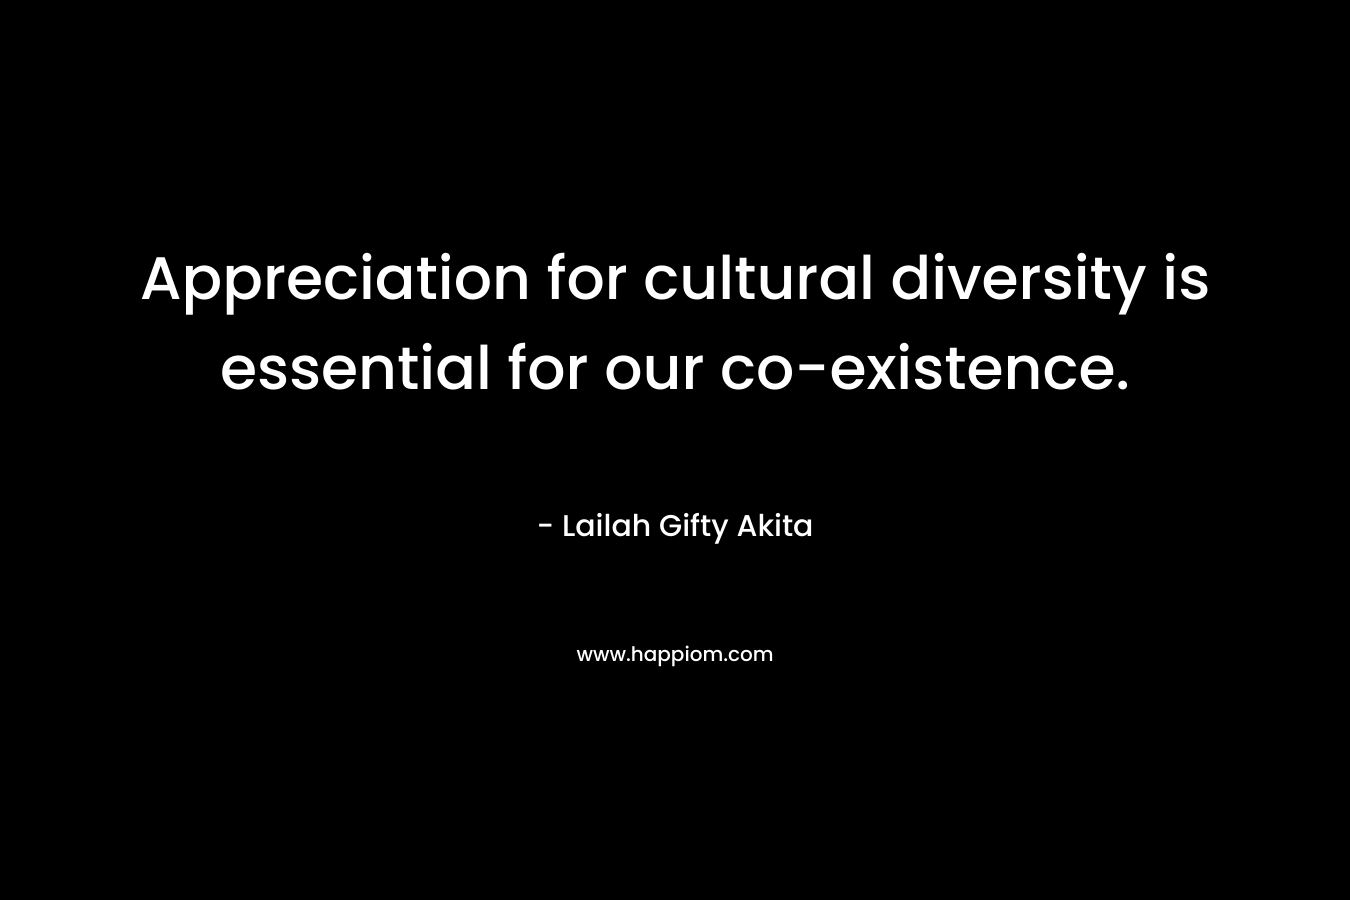 Appreciation for cultural diversity is essential for our co-existence. – Lailah Gifty Akita